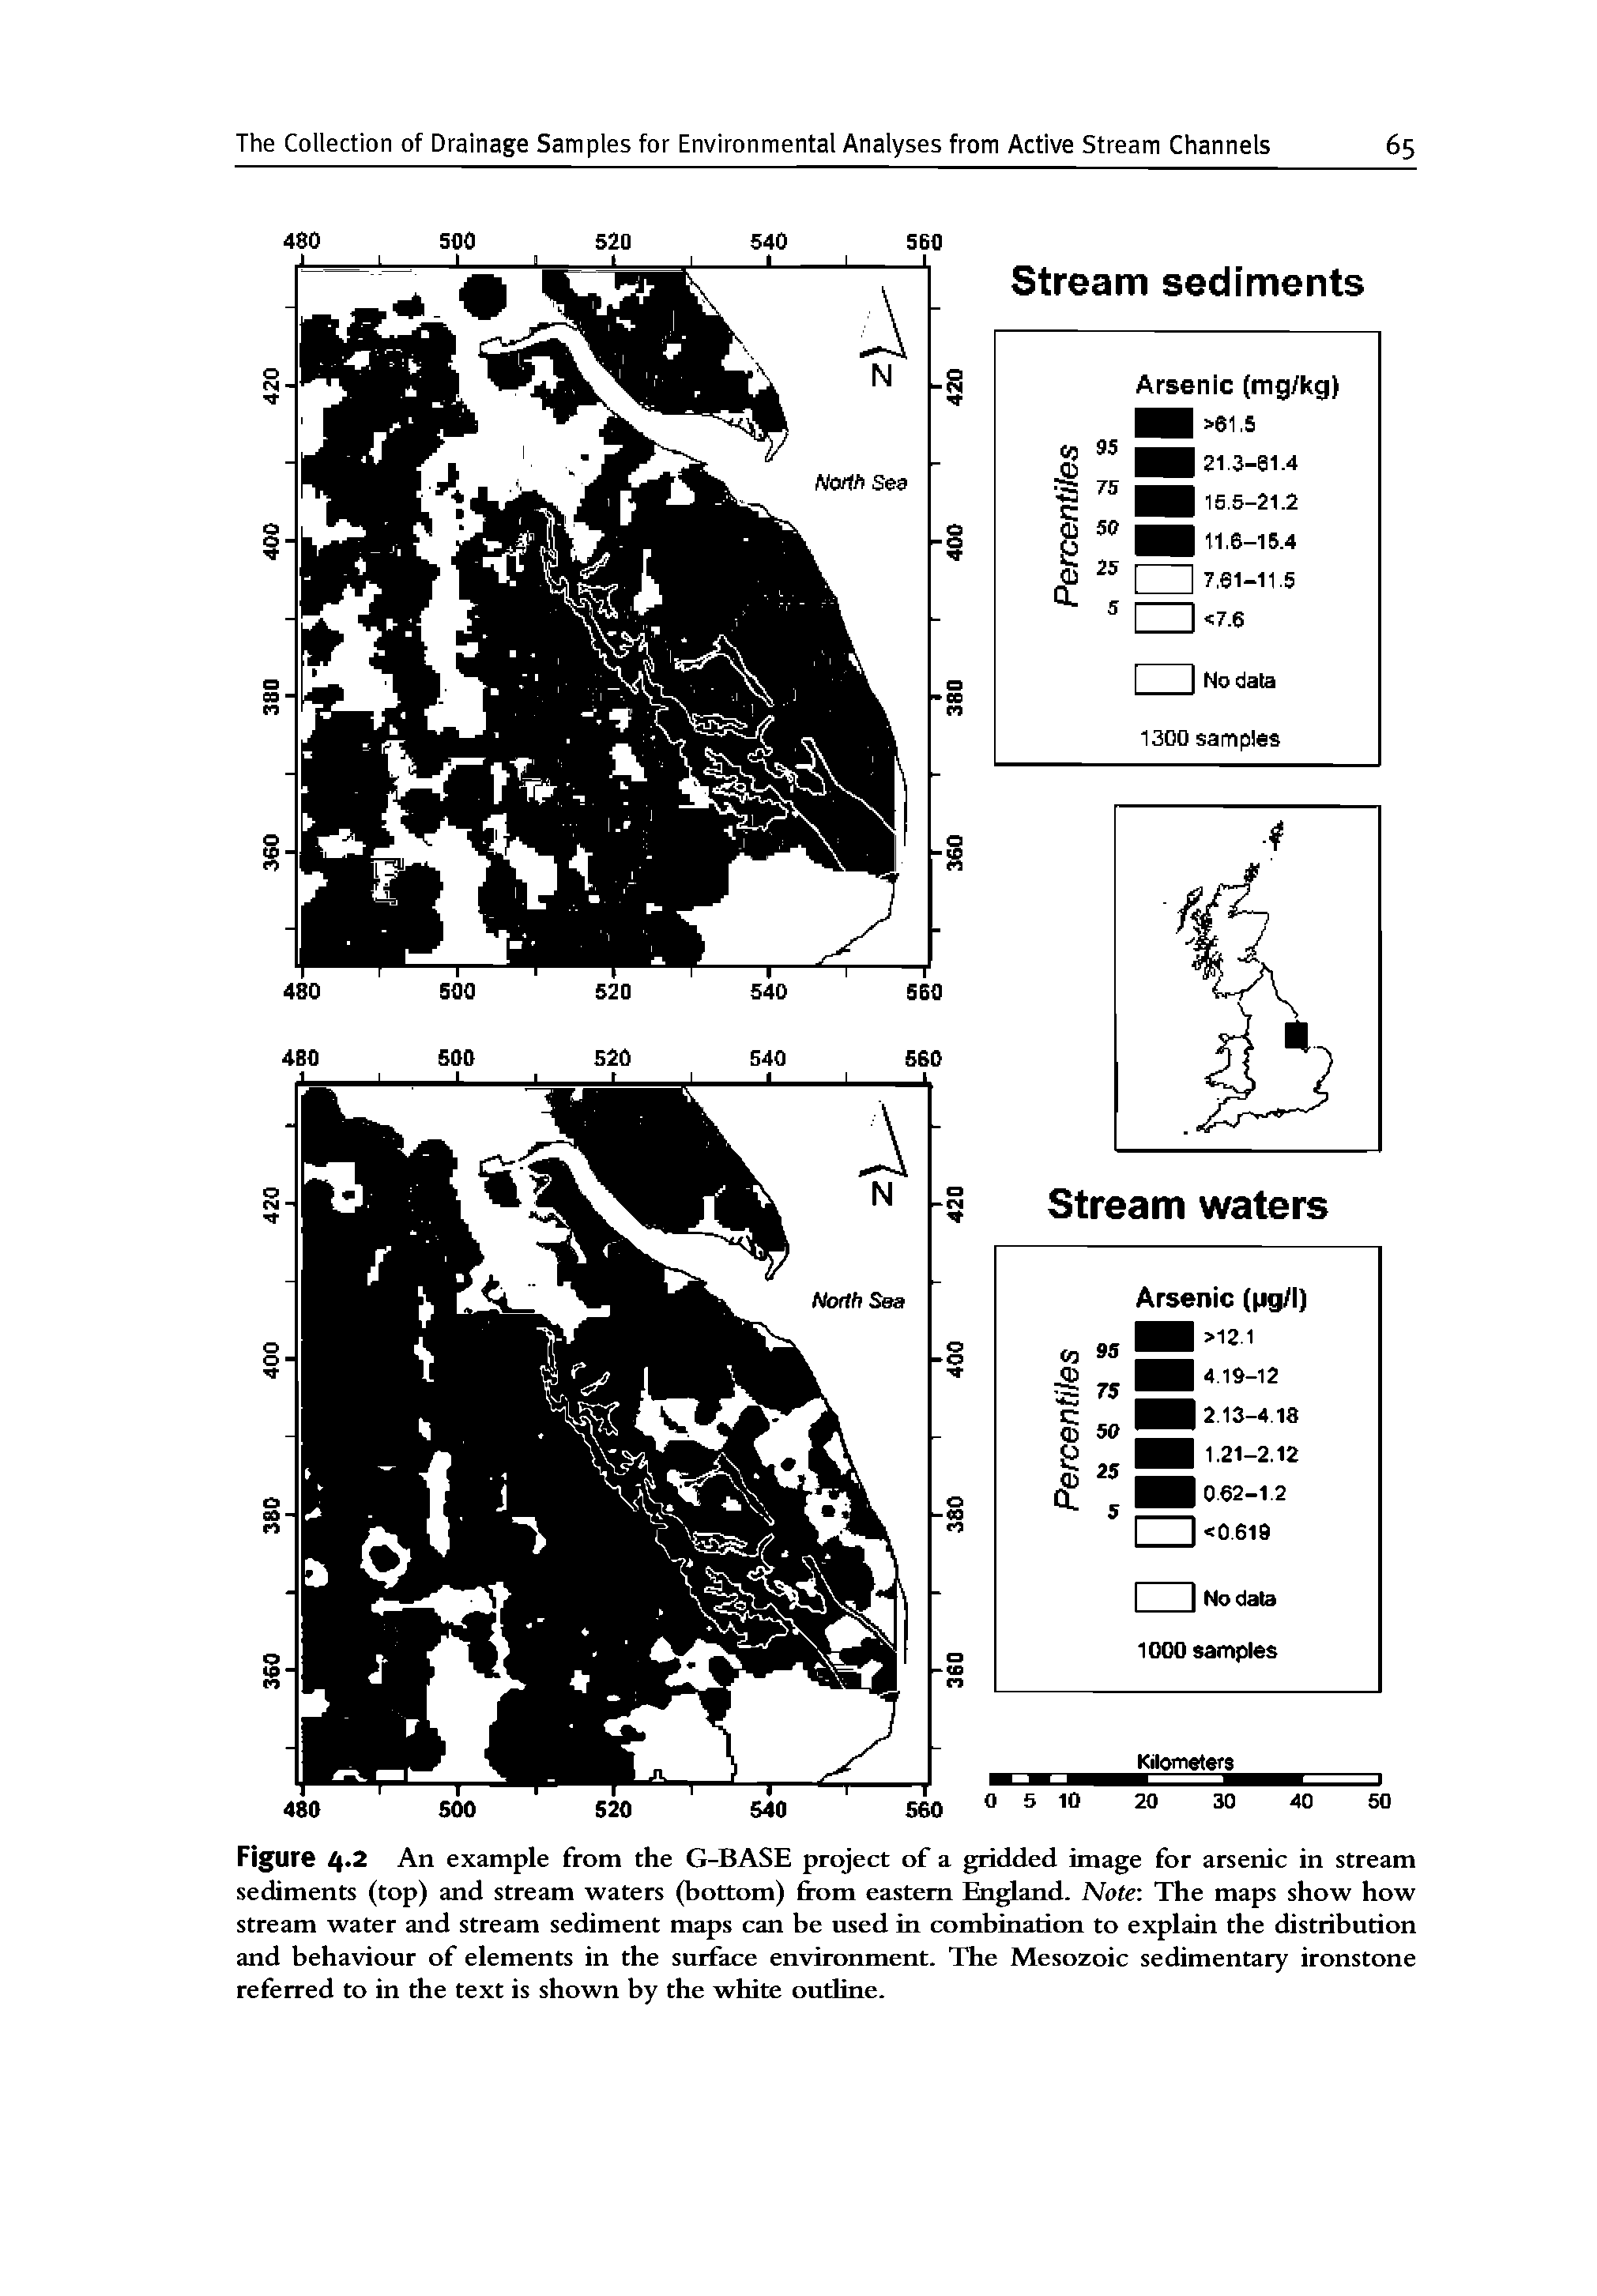 Figure 4.2 An example from the G-BASE project of a gridded image for arsenic in stream sediments (top) and stream waters (bottom) from eastern England. Note The maps show how stream water and stream sediment maps can be used in combination to explain the distribution and behaviour of elements in the surface environment. The Mesozoic sedimentary ironstone referred to in the text is shown by the white outline.